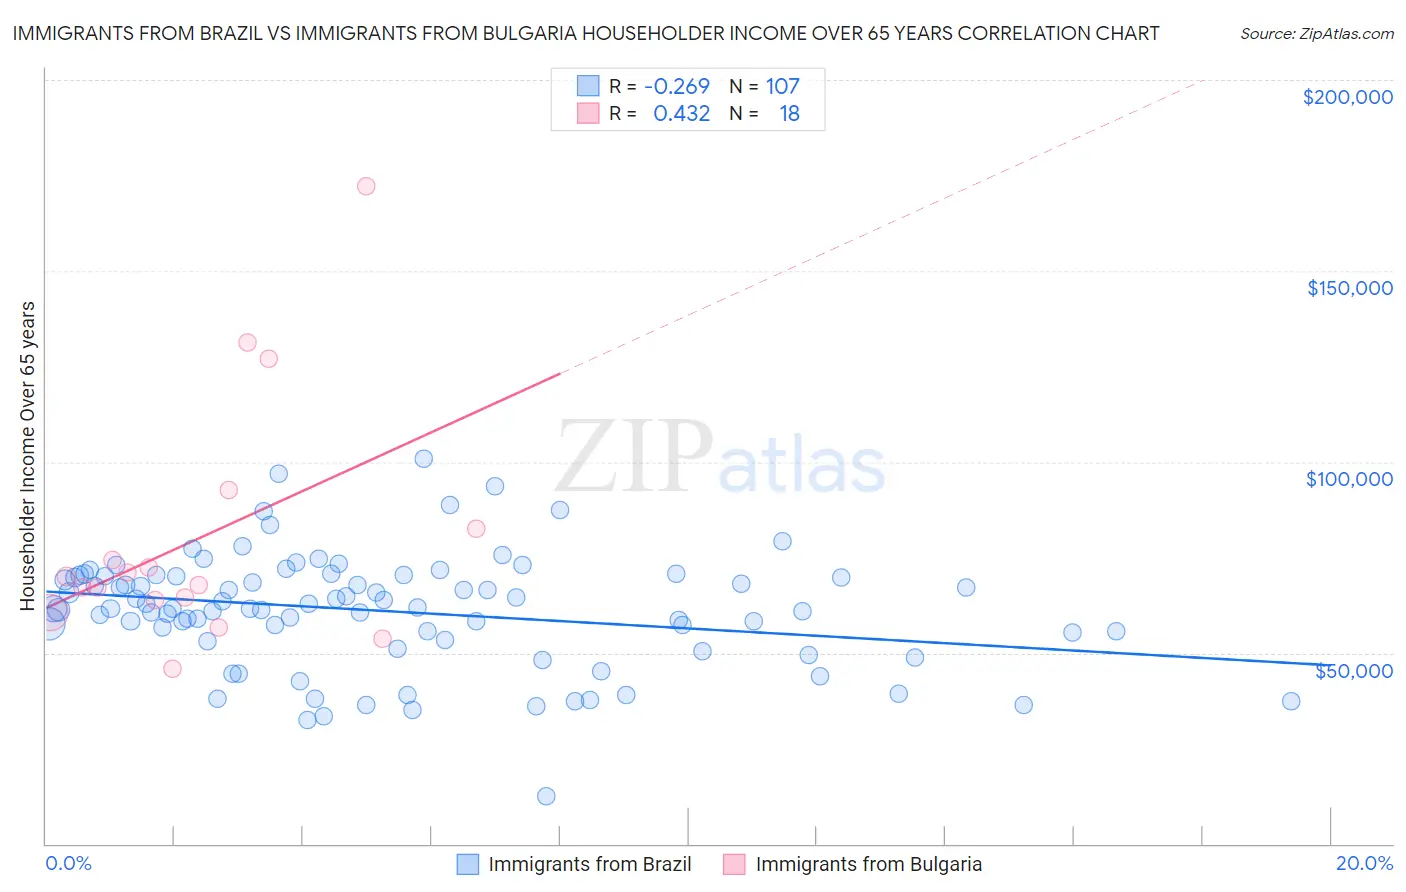 Immigrants from Brazil vs Immigrants from Bulgaria Householder Income Over 65 years